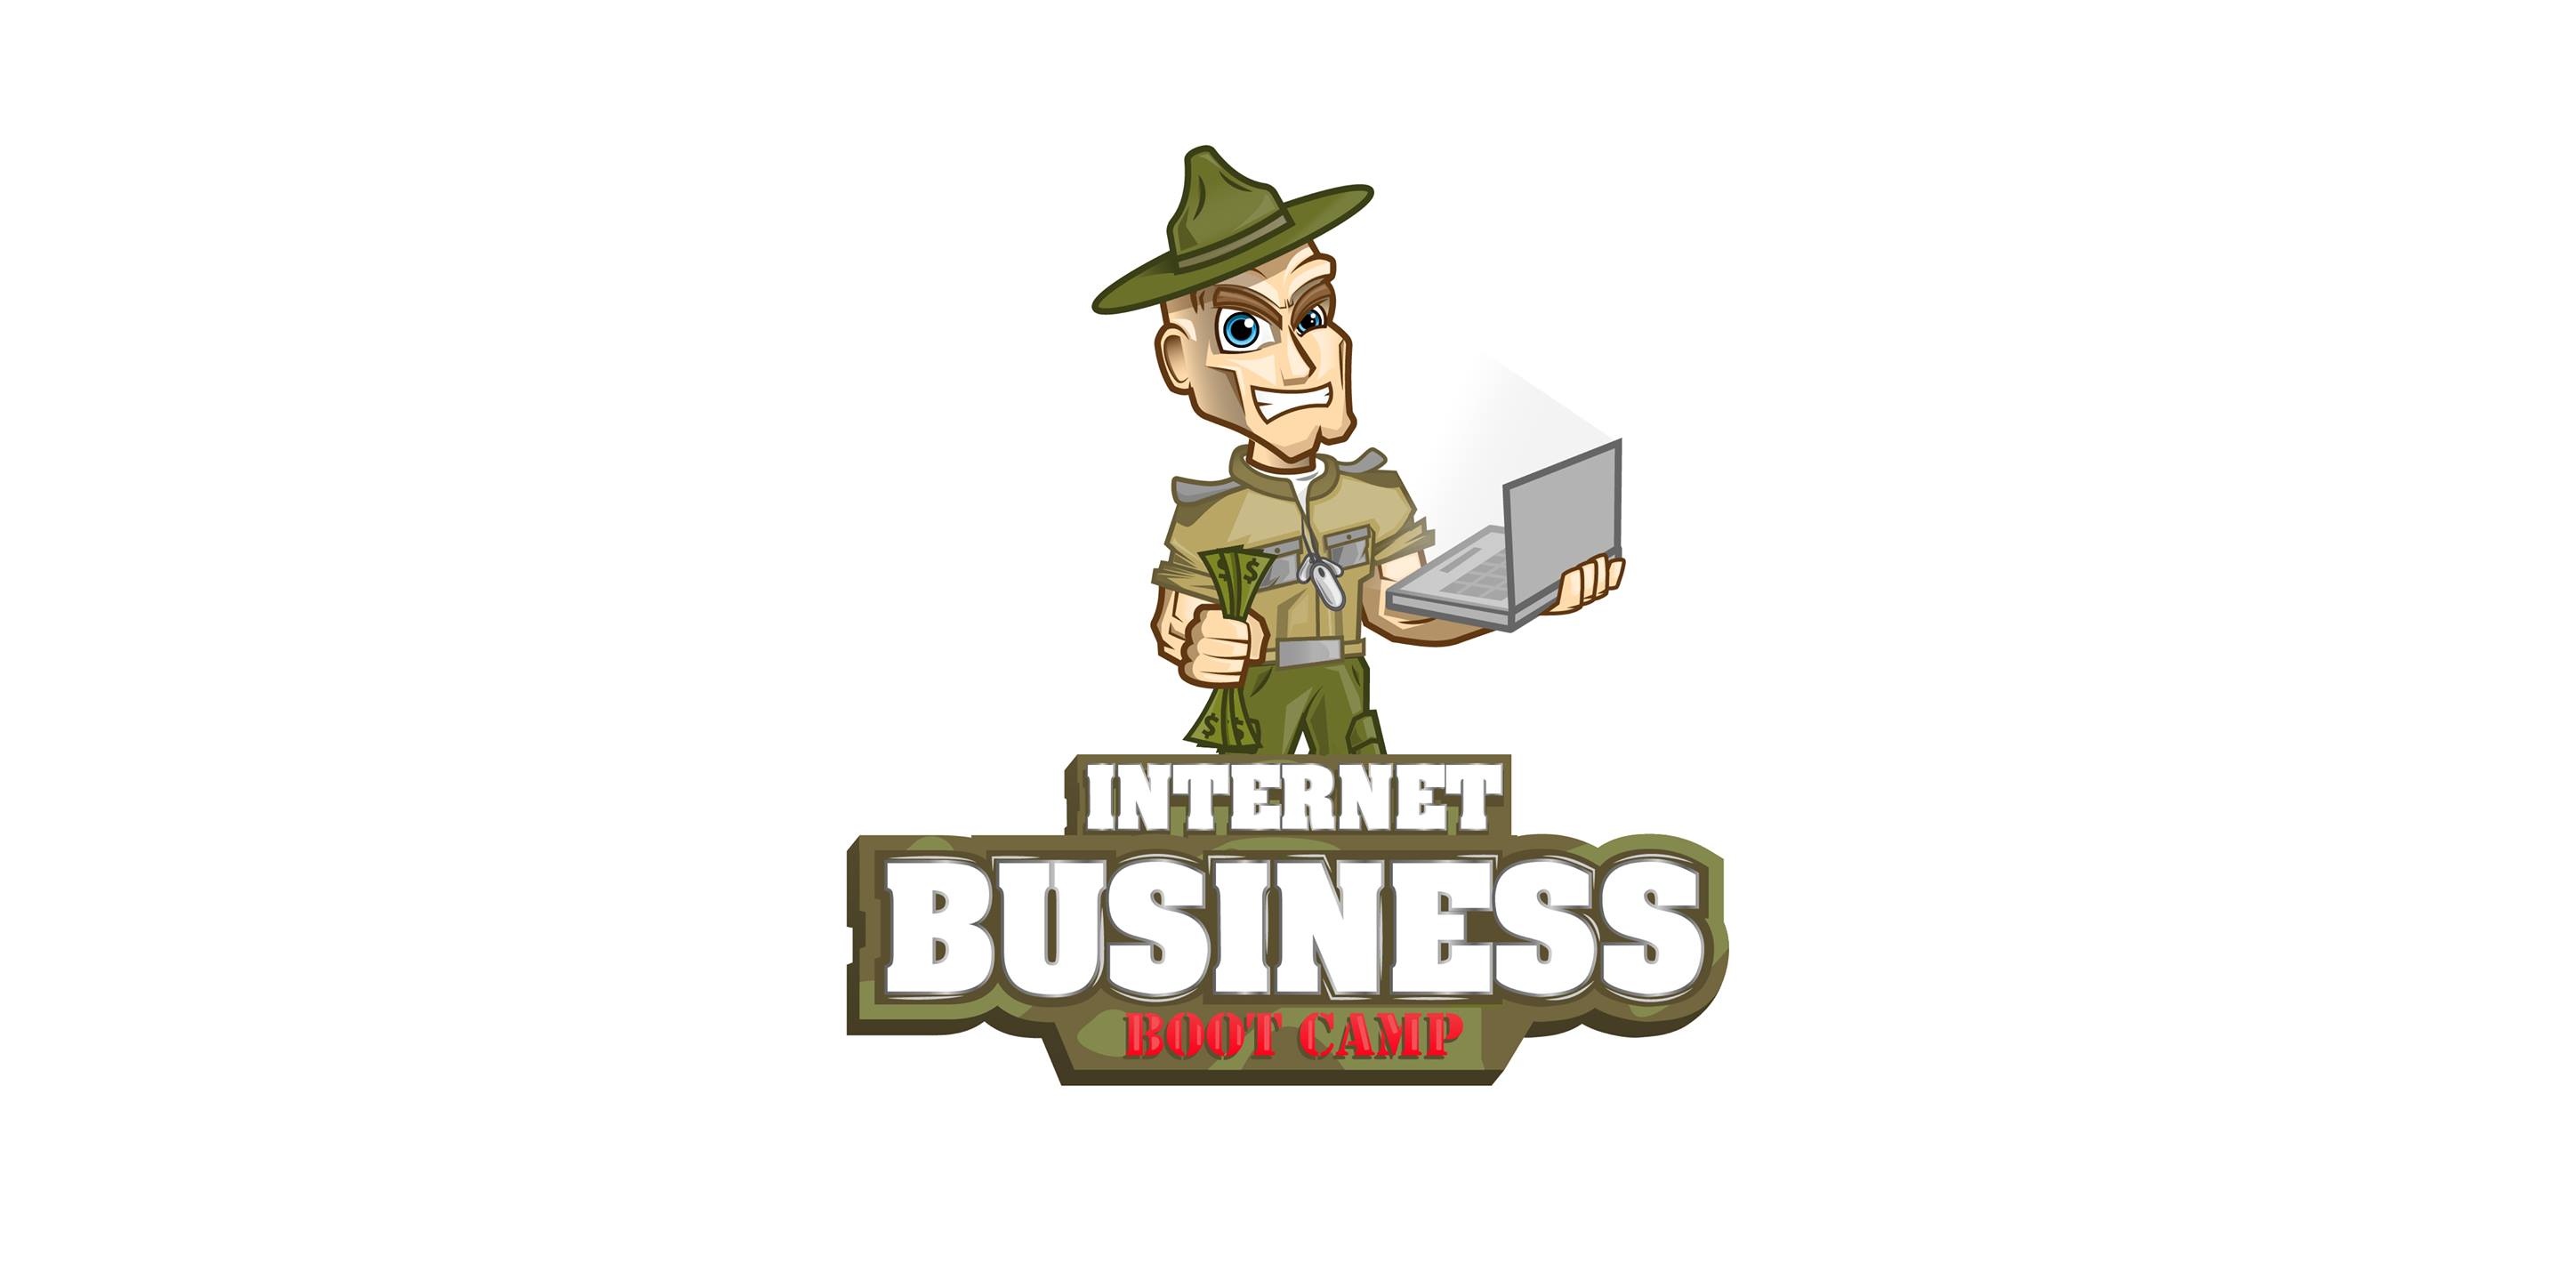 Business logo of Internet Business Boot Camp